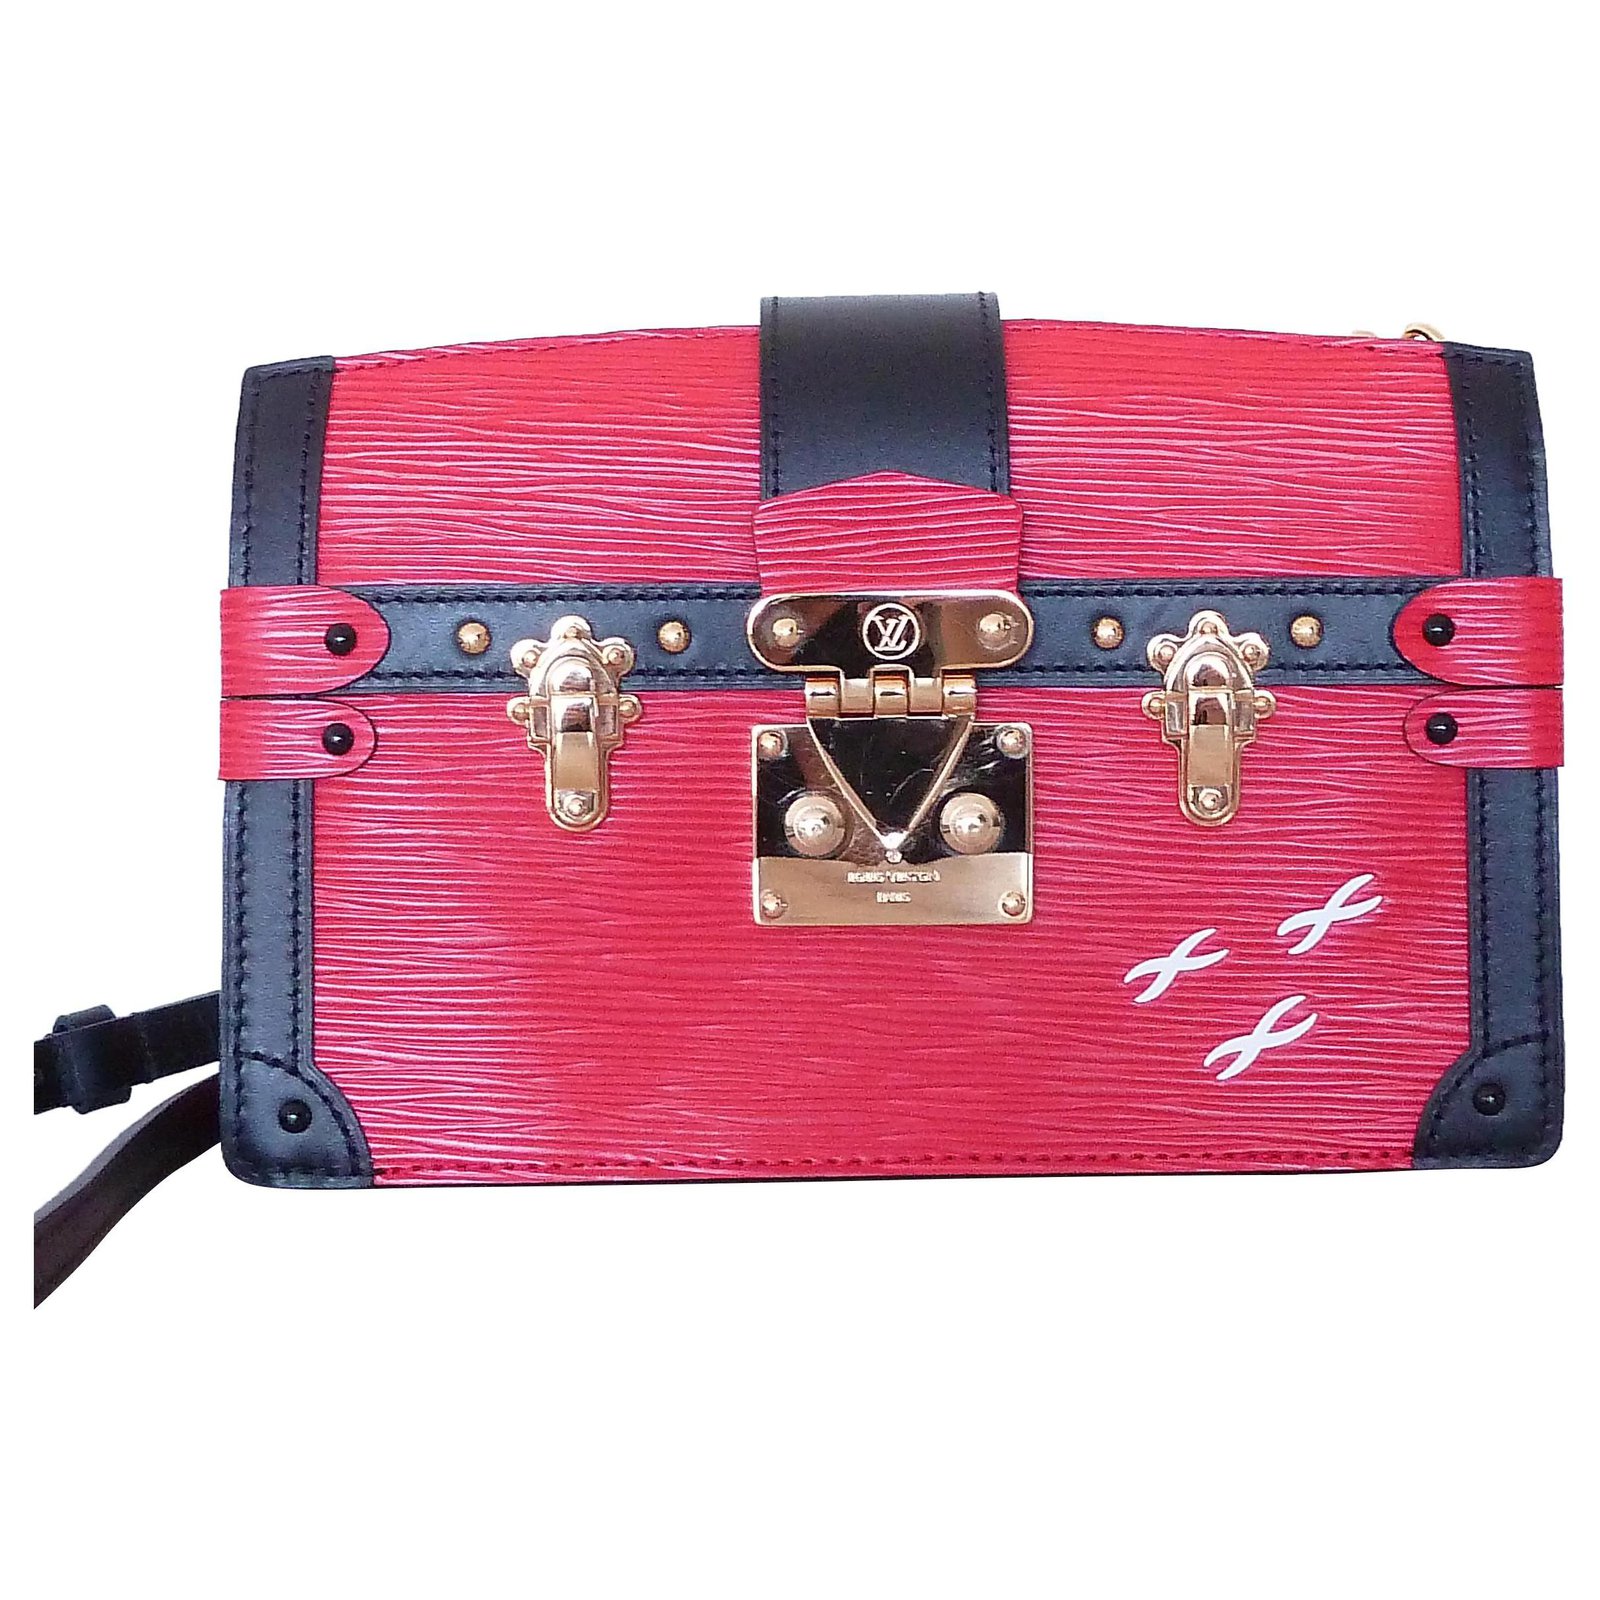 black louis vuitton bag with red interior